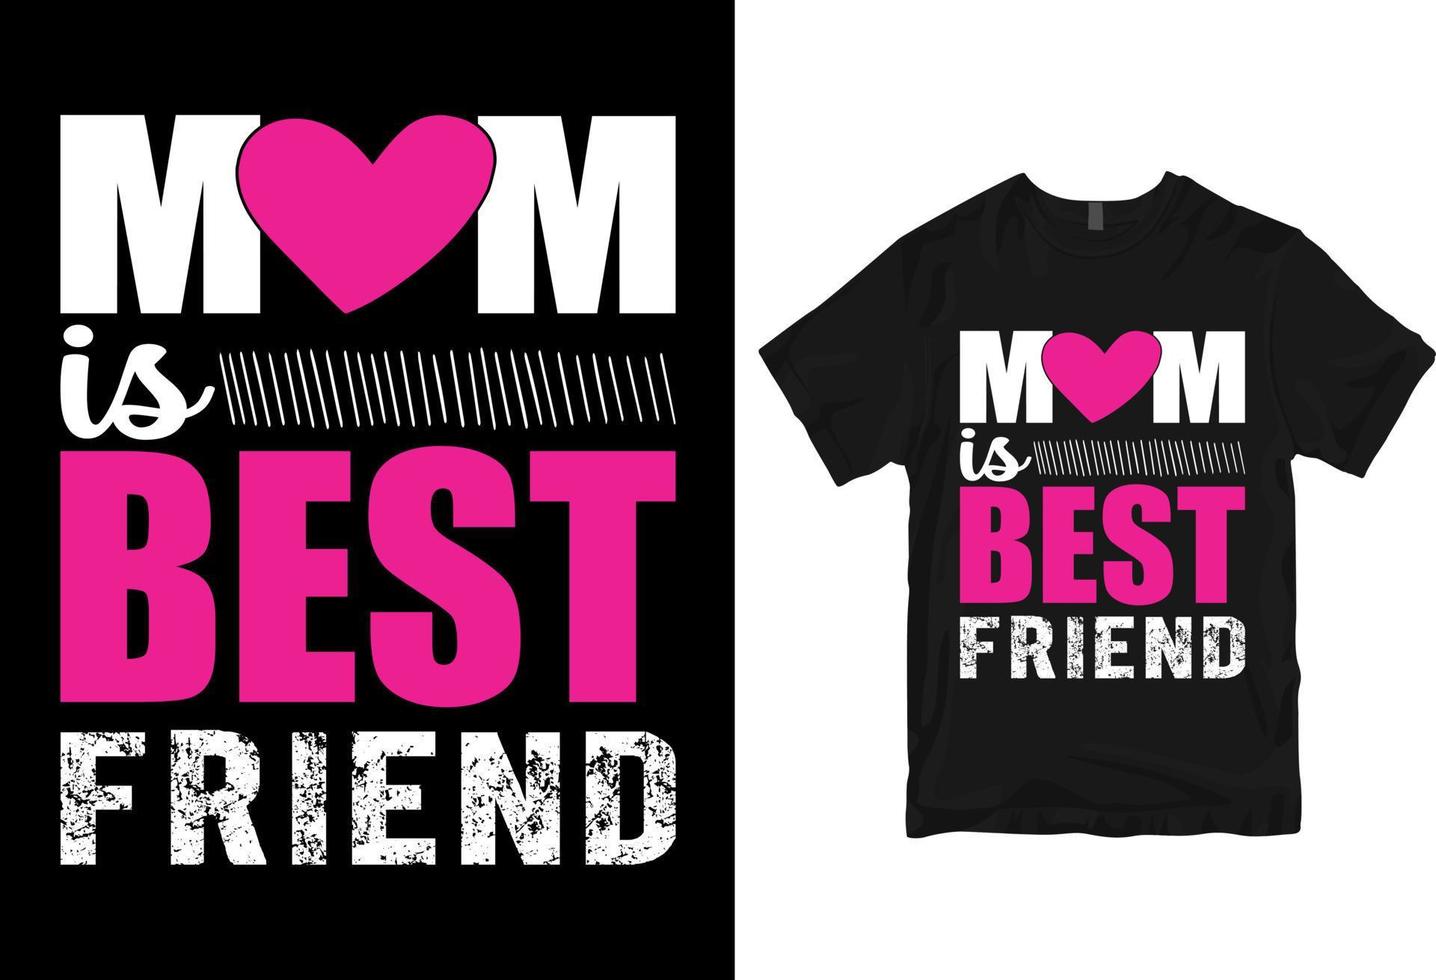 Mom is best friend, Happy mother's day - mother quotes typographic t shirt design vector